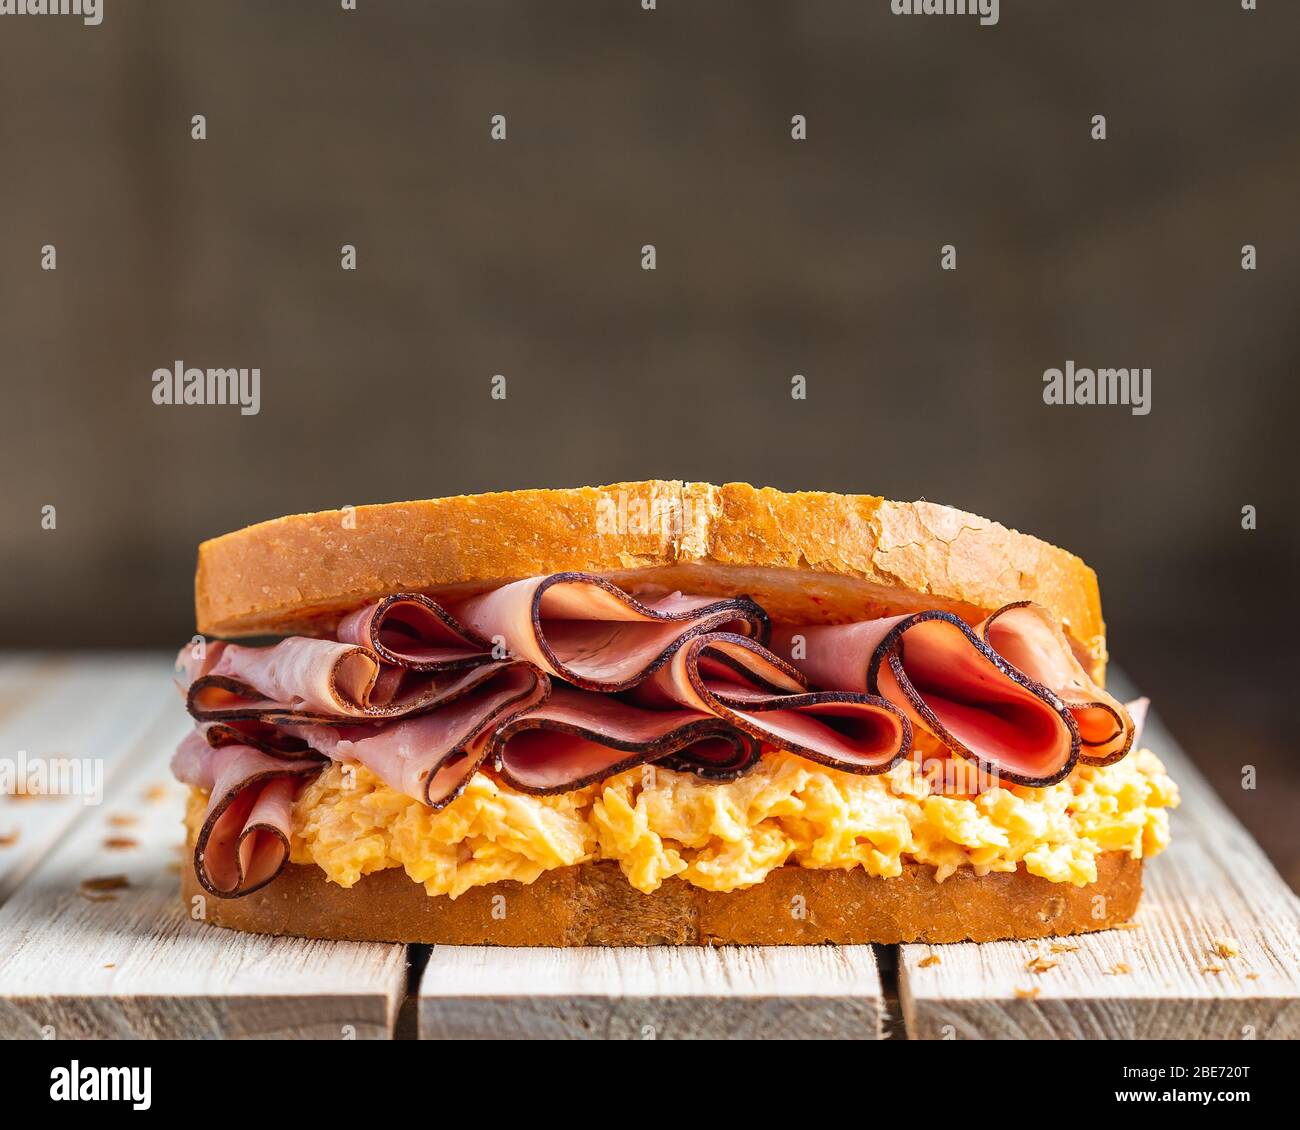 Ham and cheese sandwich on wooden surface with linen backdrop Stock Photo